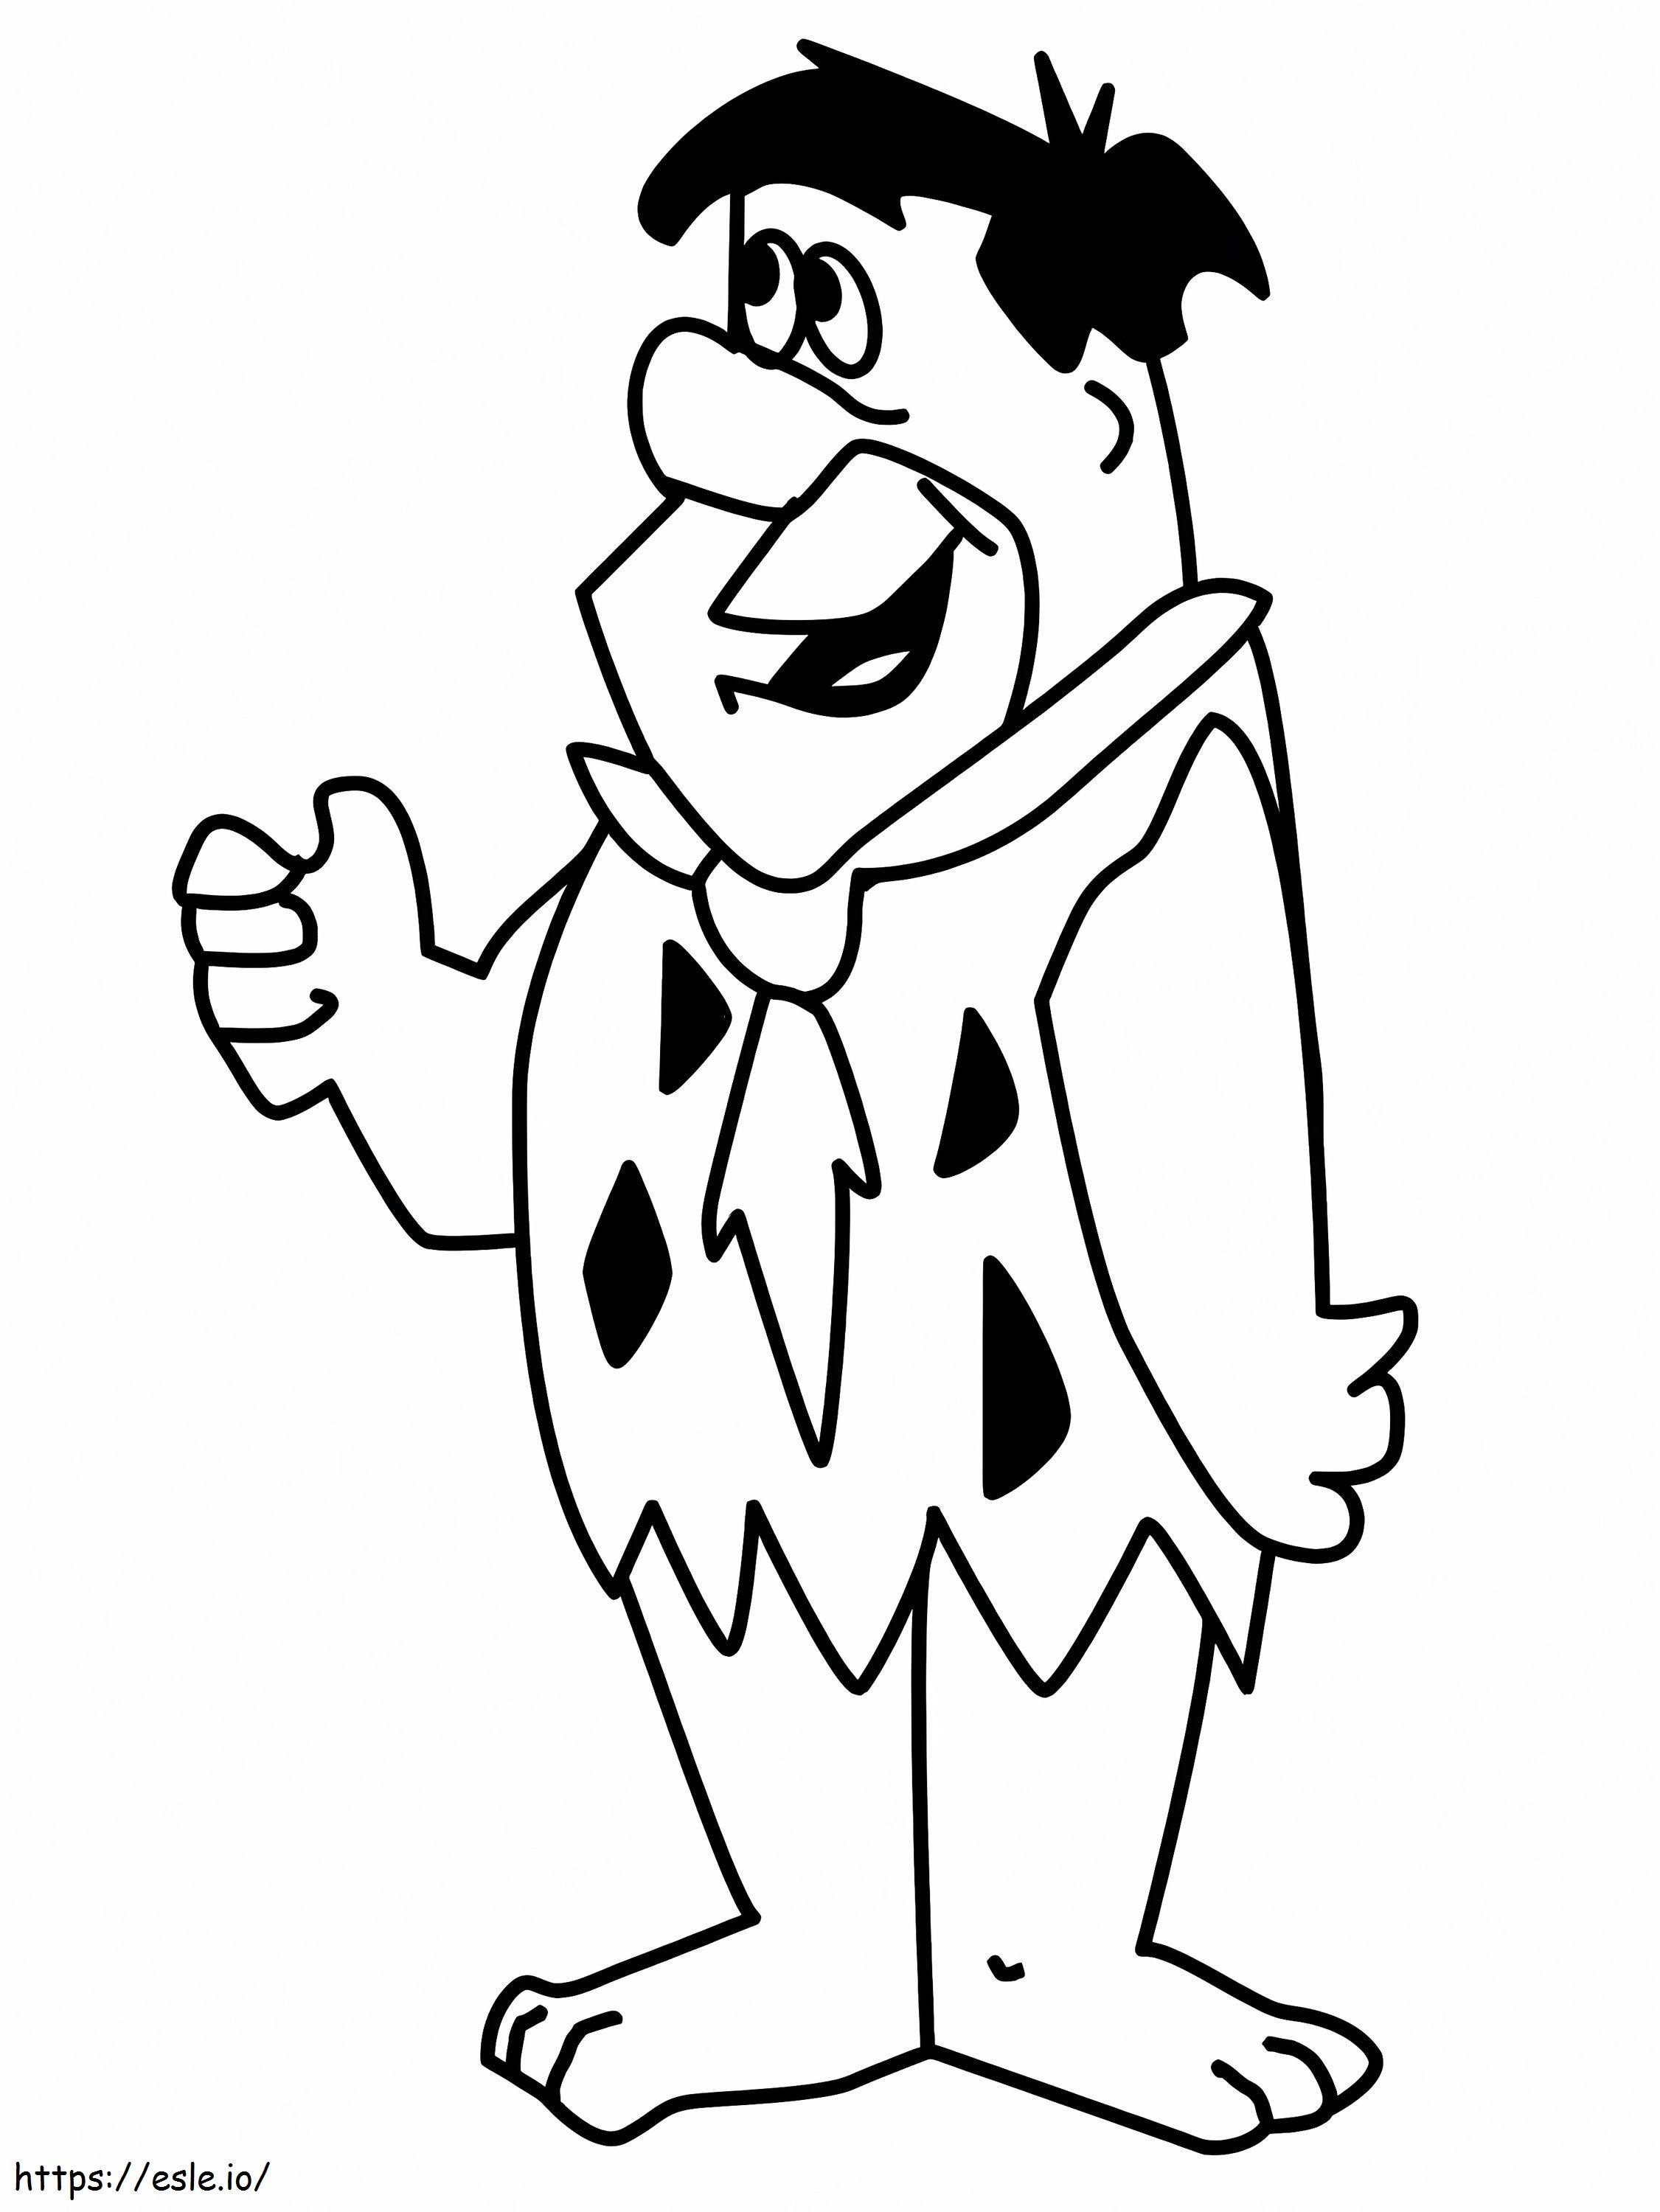 Fred Flintstone Smiling coloring page